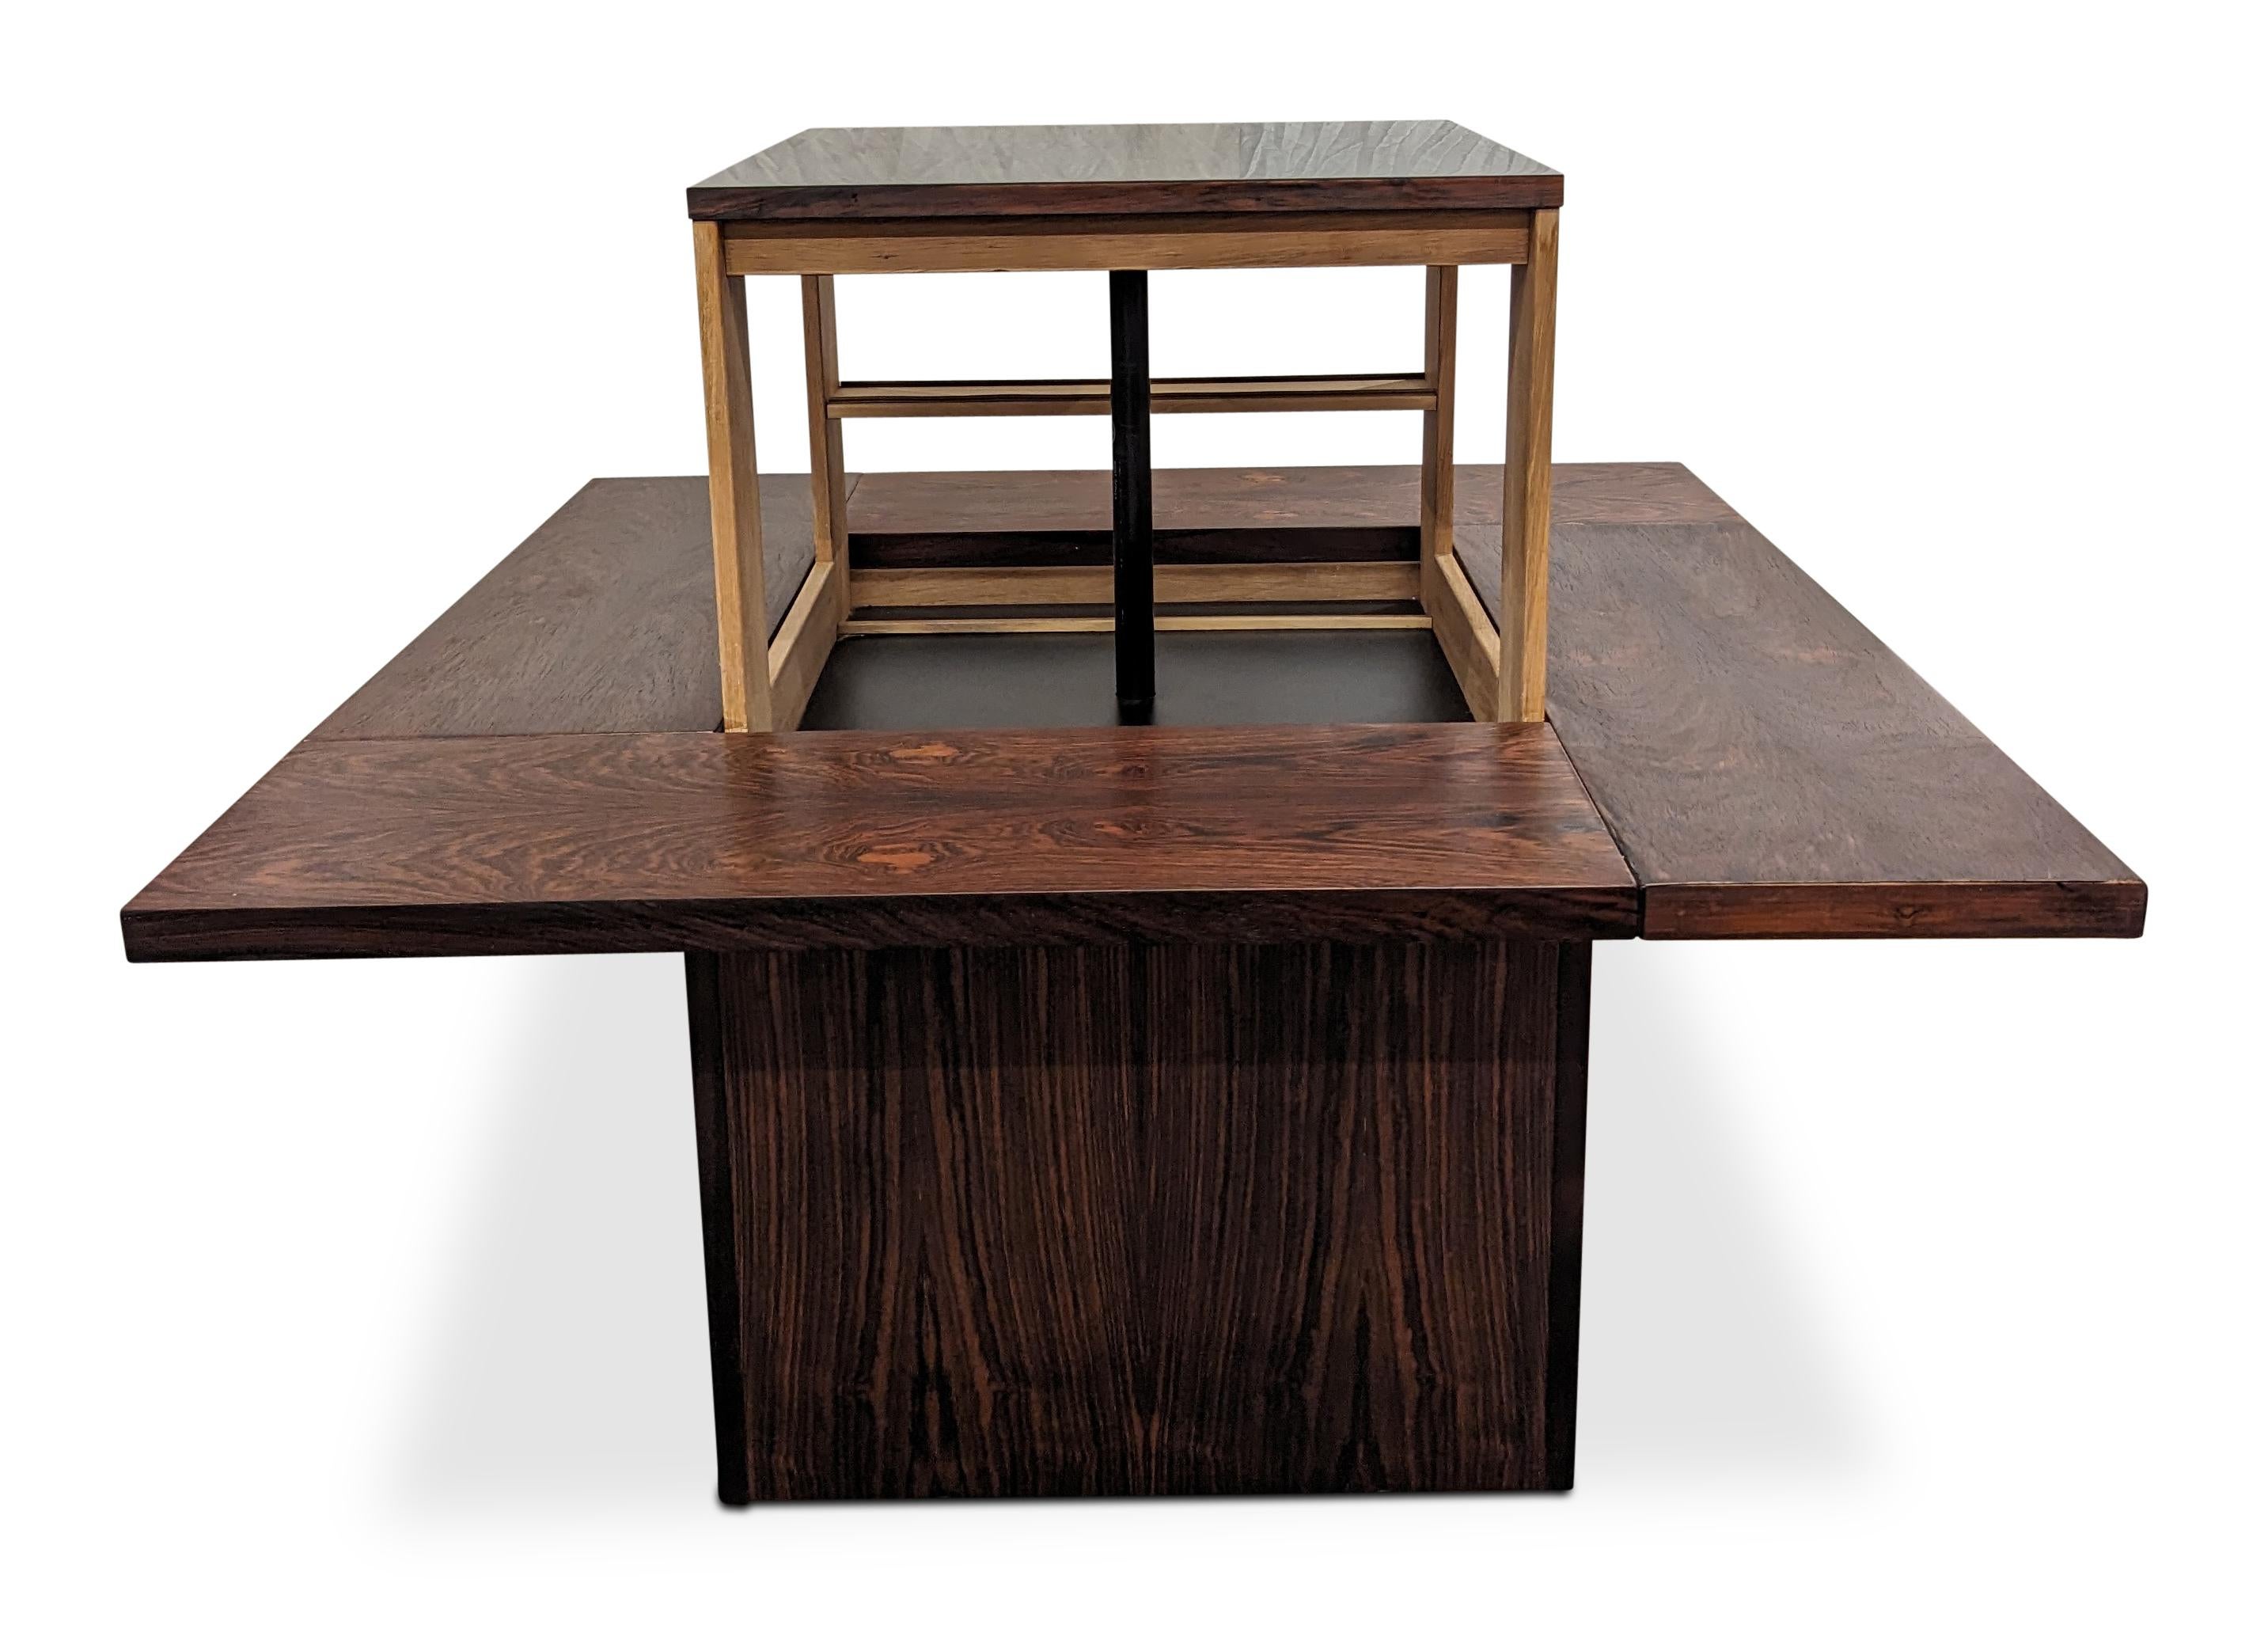 Has a few small discolorations on the top. Please see pictures. 
Vintage Danish mid-century modern, made in the 1950's - Recently refurbished

Brazilian rosewood have been illegal to harvest since 1961 and on the U.N. CITES list of endangered spices